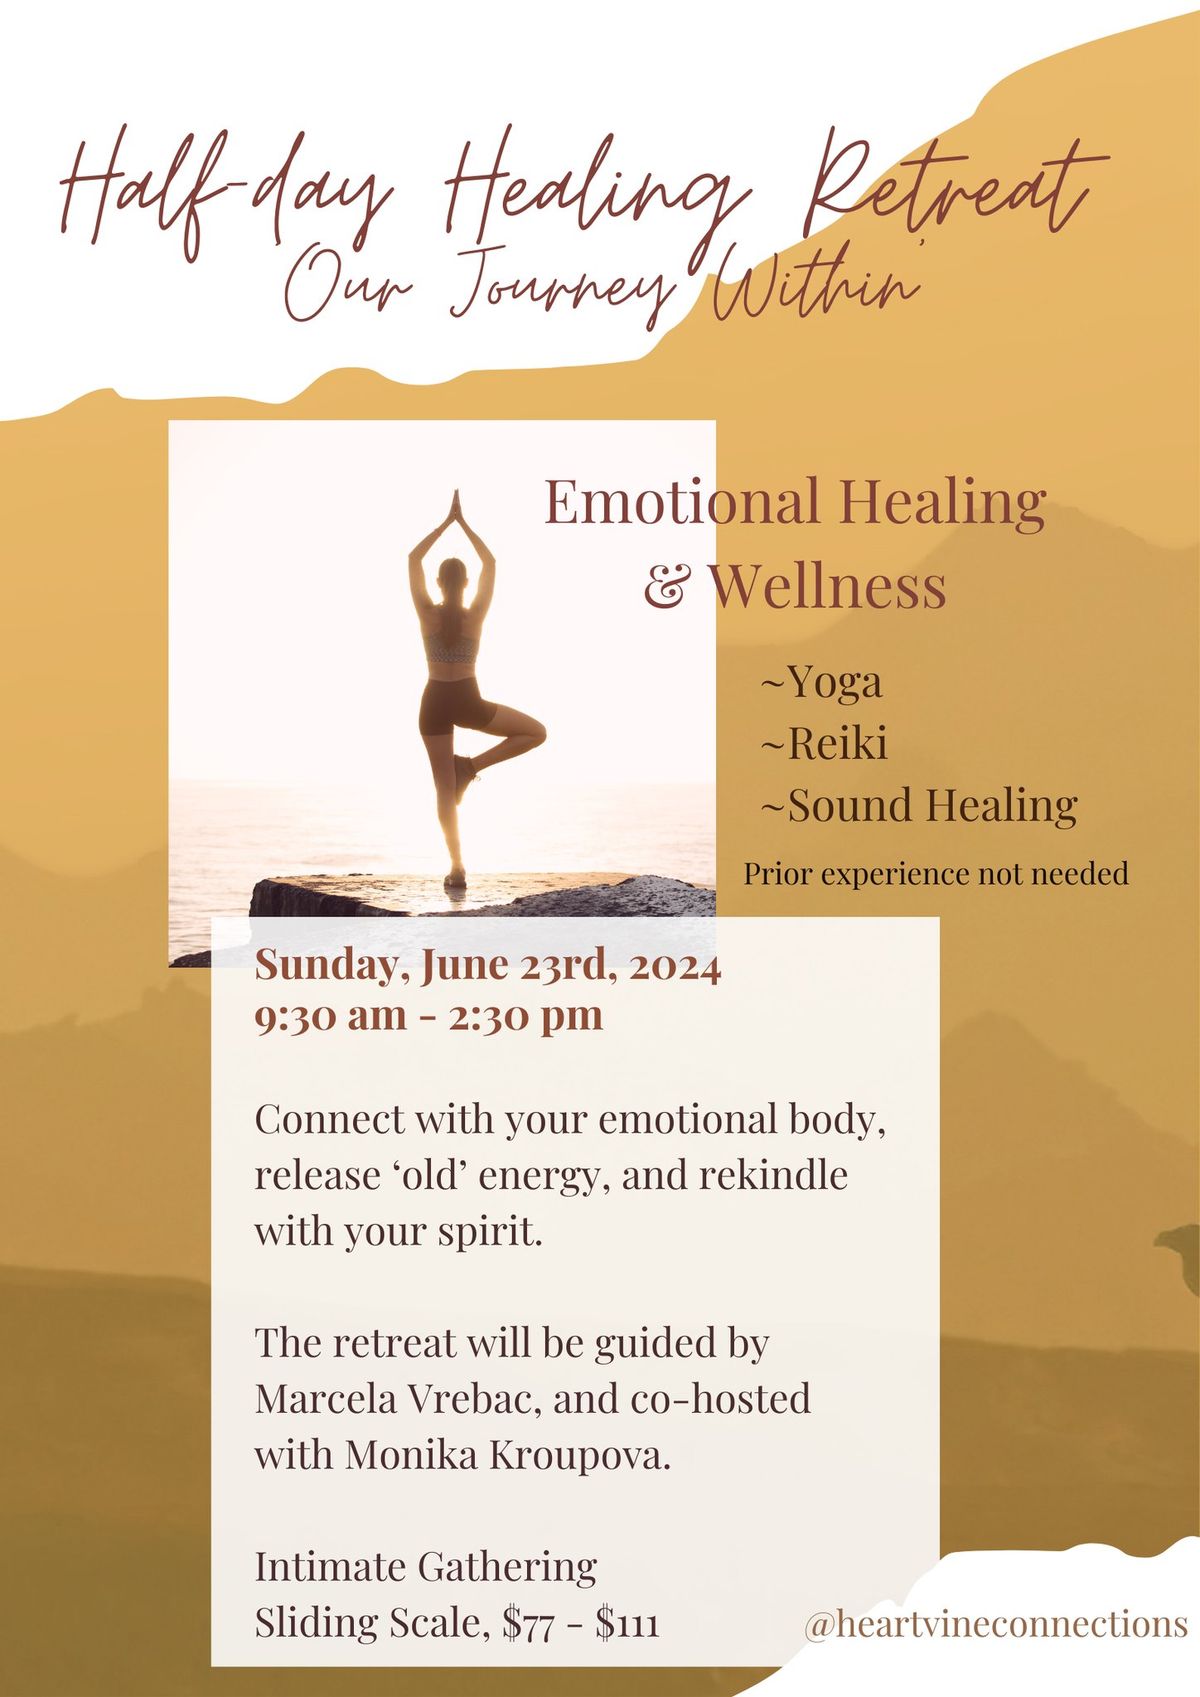 Our Journey Within ~ Half day Healing Retreat